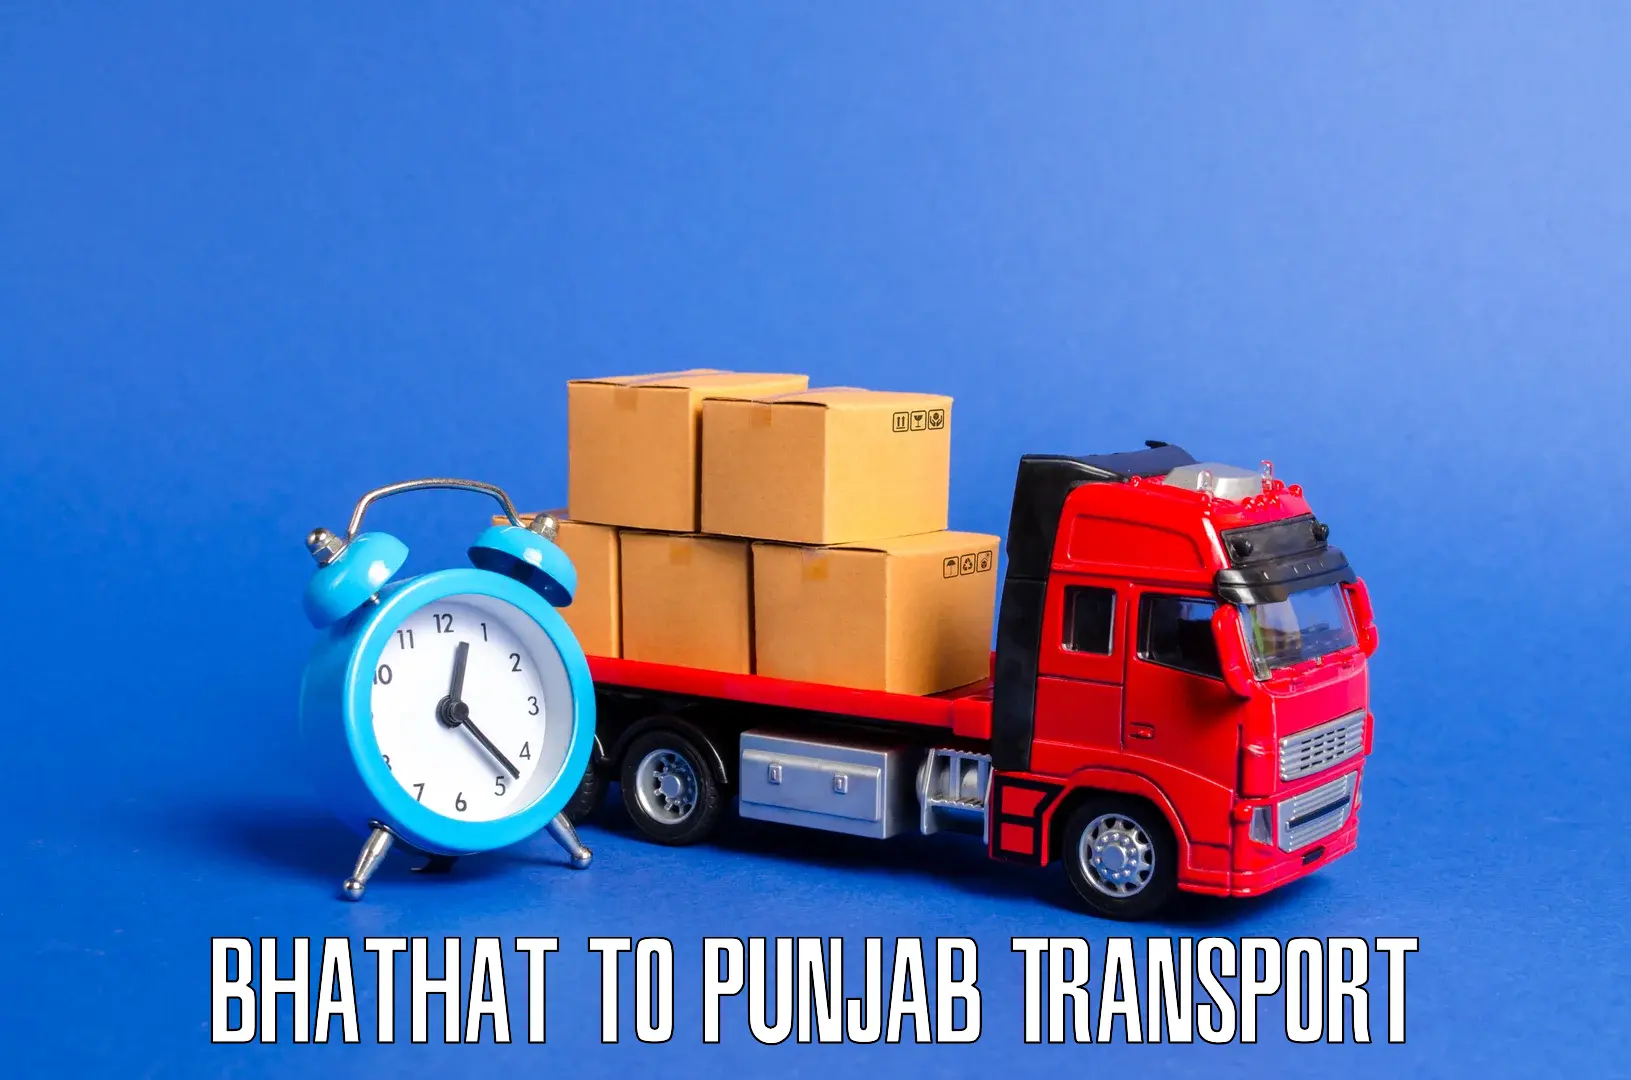 Transportation solution services Bhathat to Dhilwan